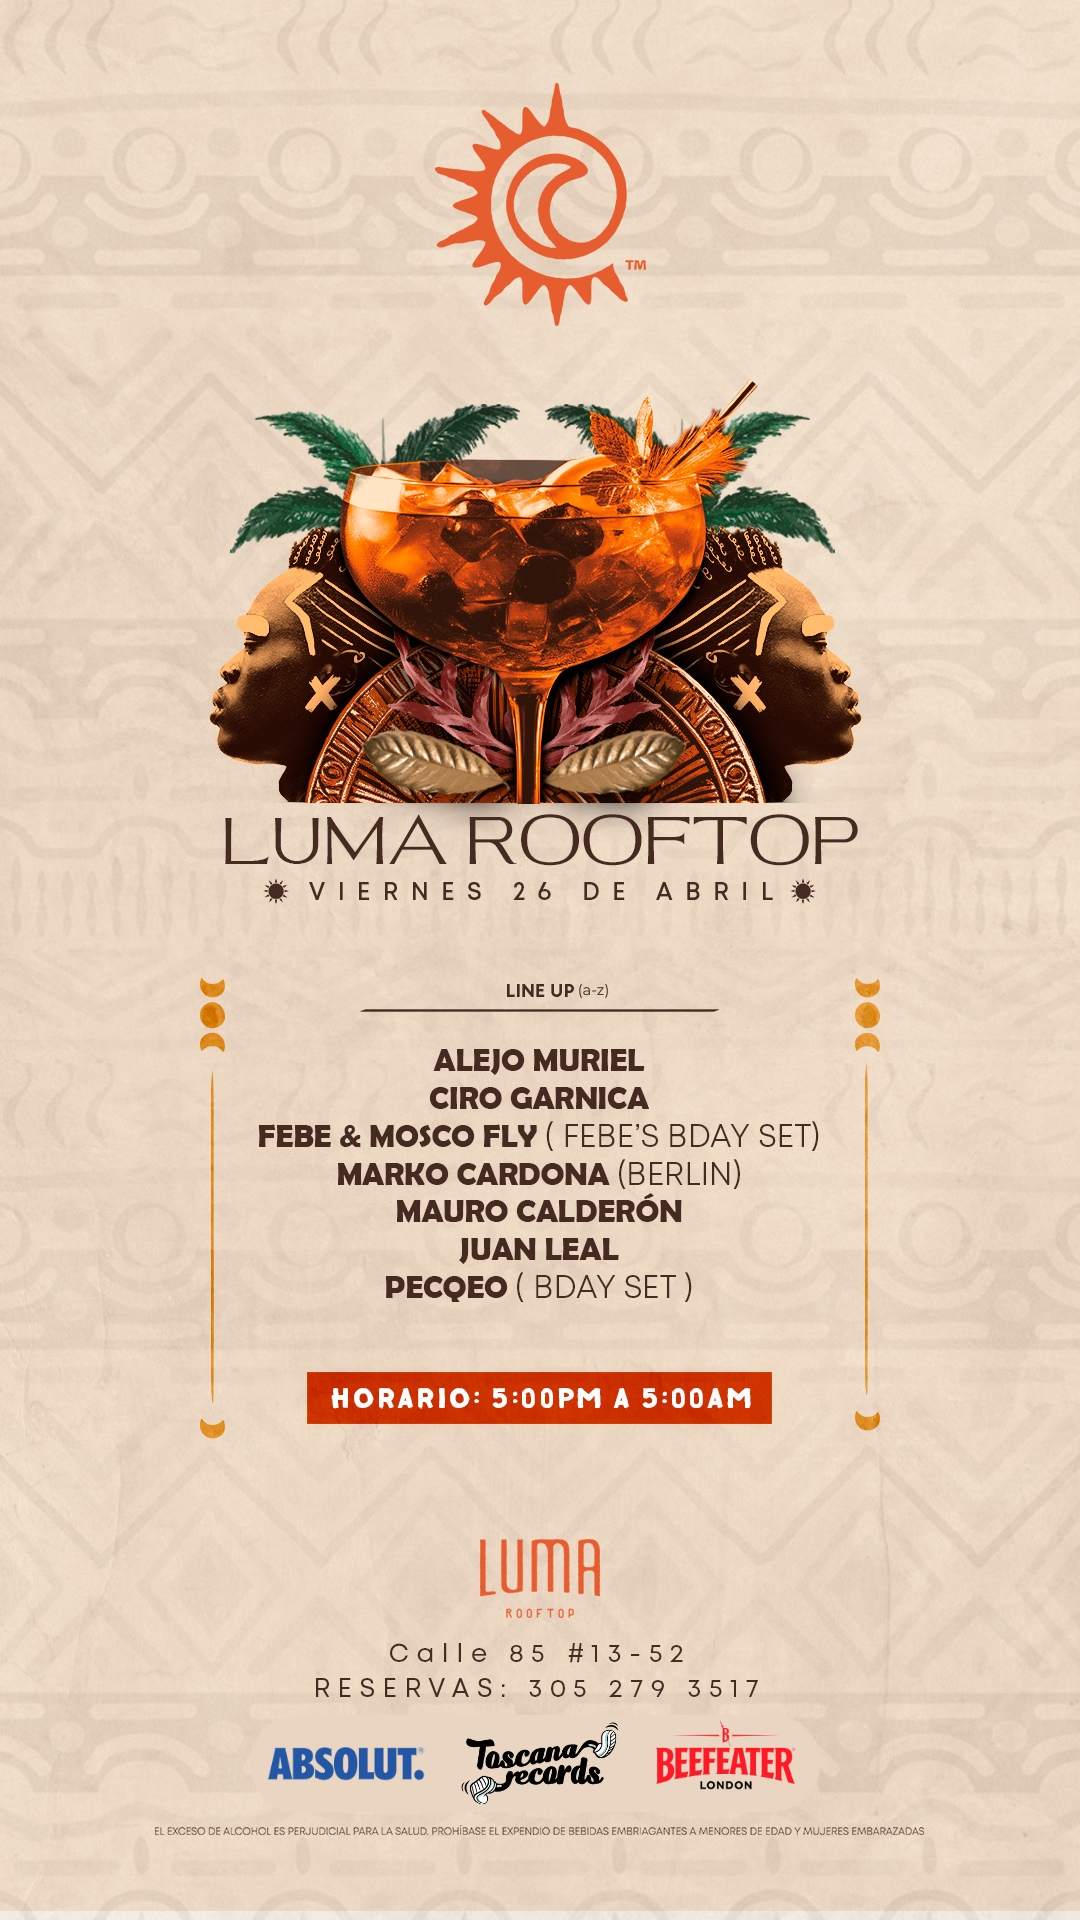 Luma Rooftop with Toscana Records - フライヤー表